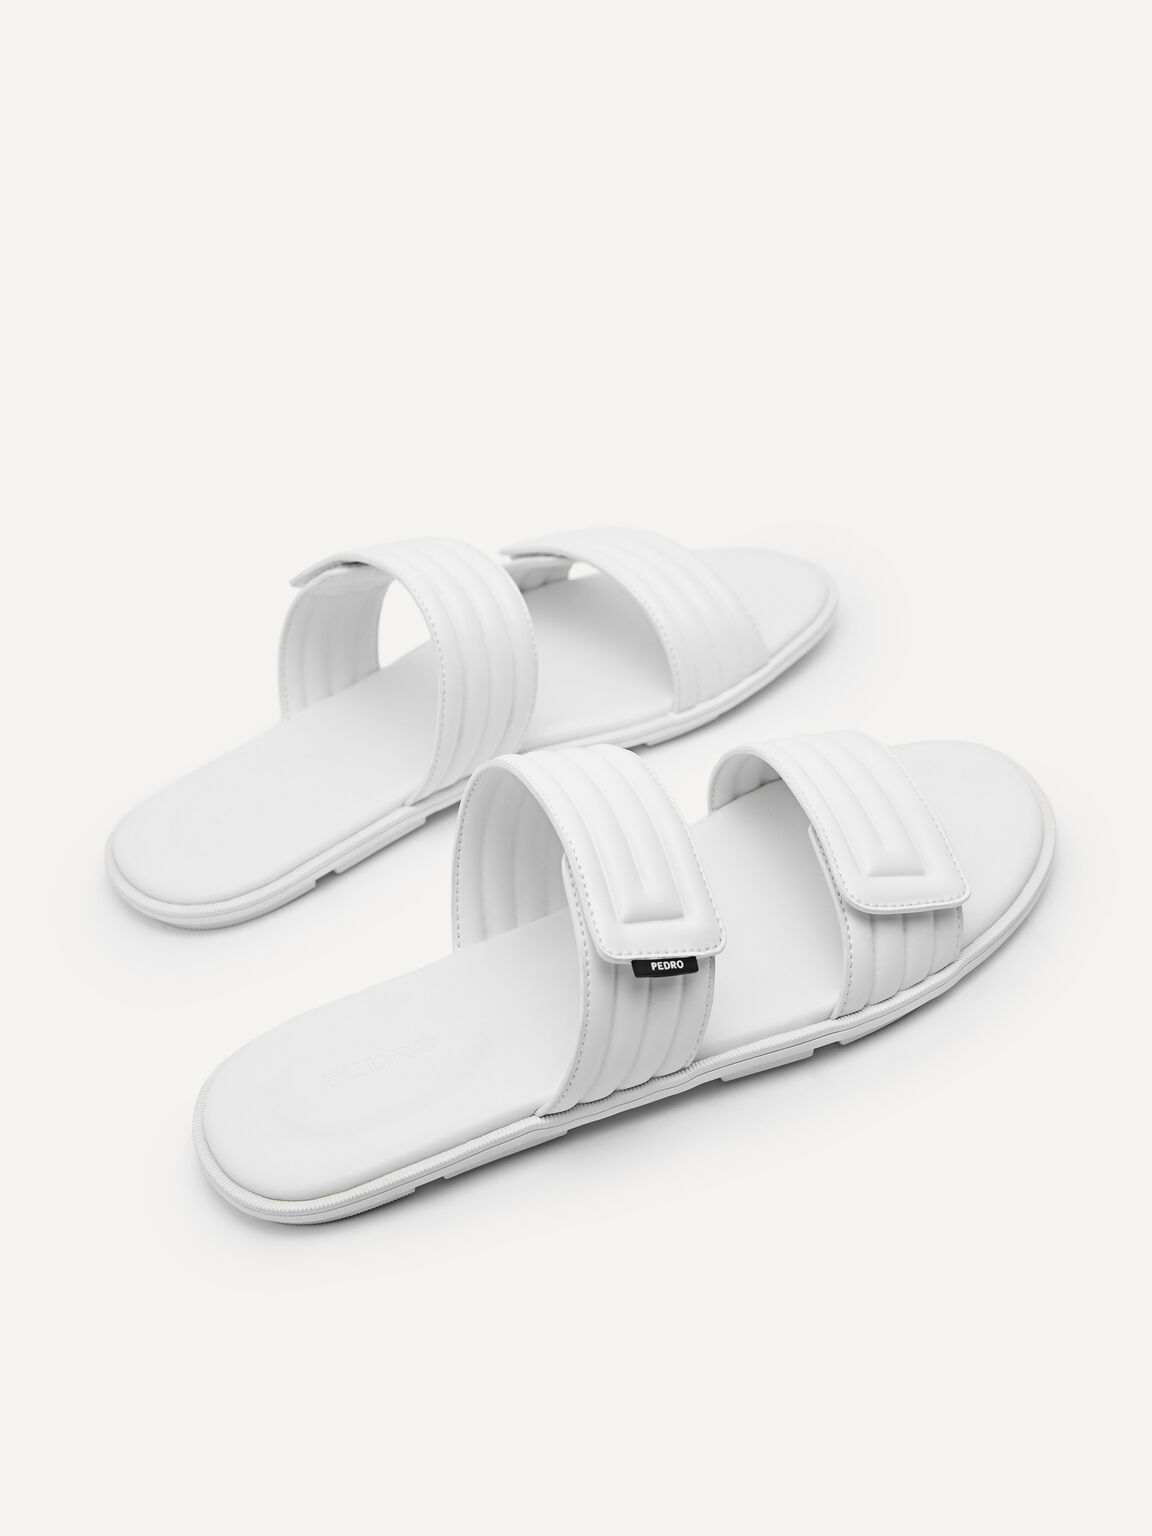 Quilted Double Strap Slide Sandals, White